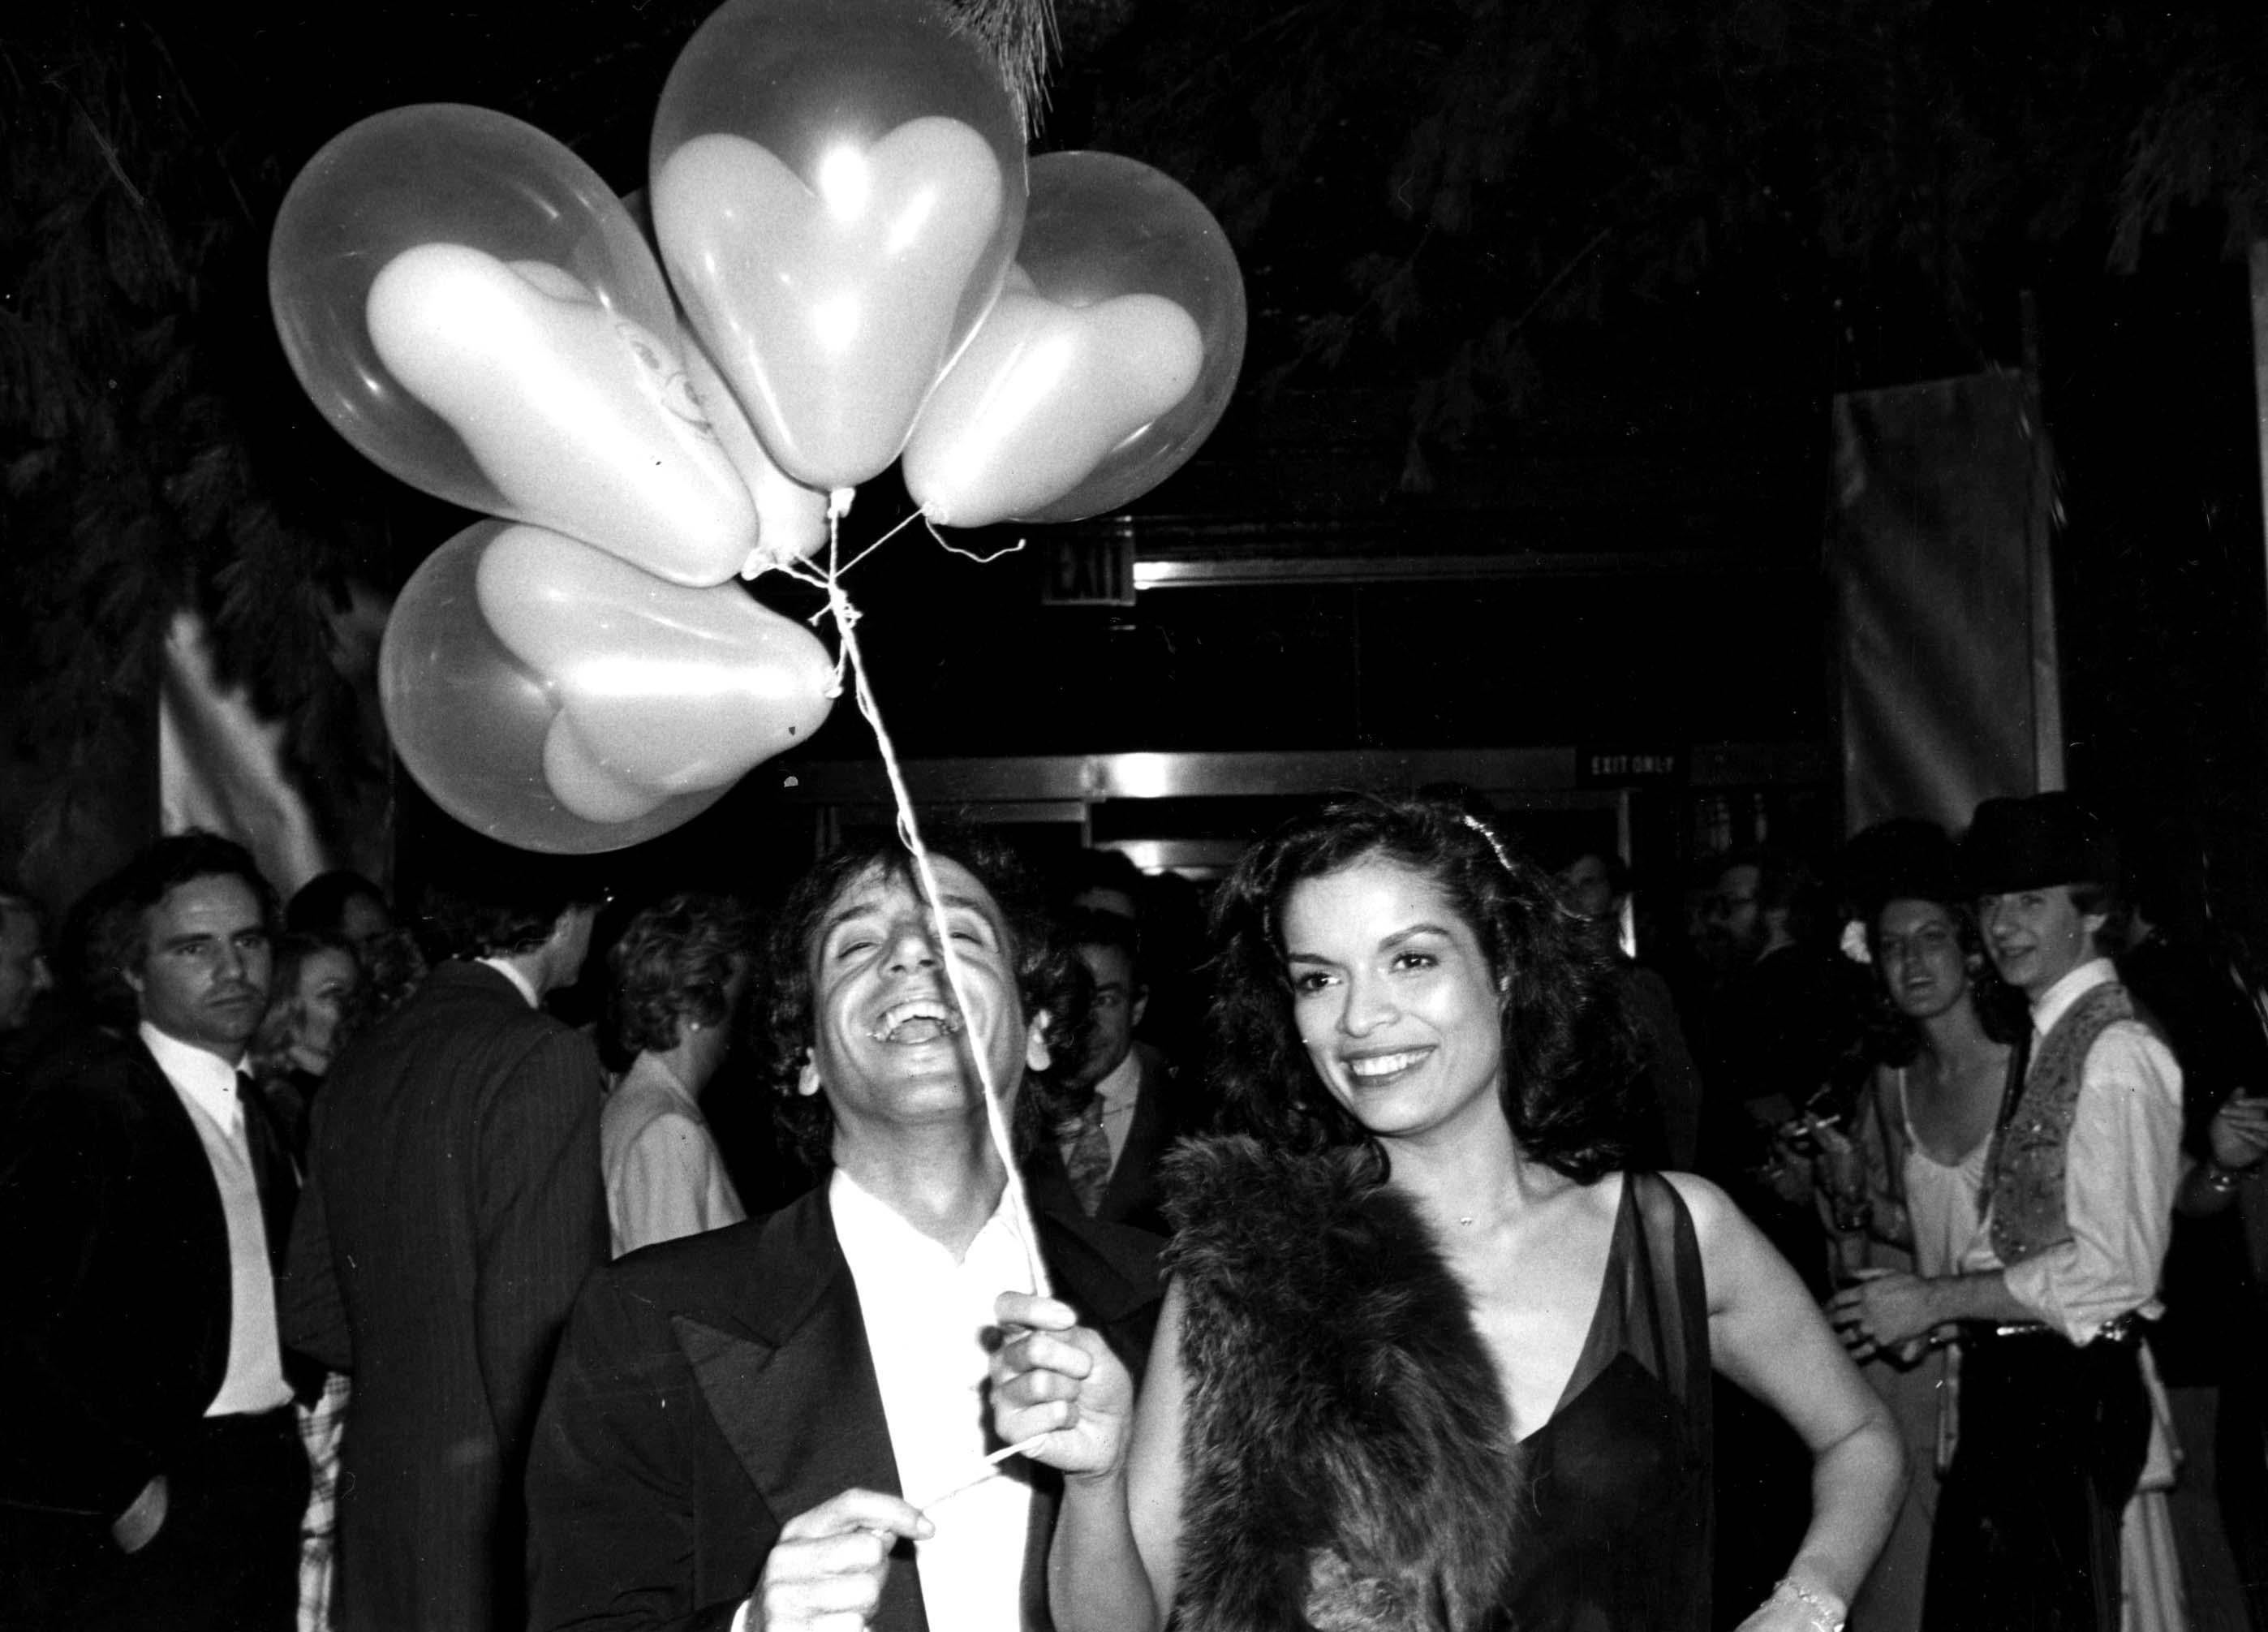 Michael Norcia Portrait Photograph - Bianca Jagger and Steve Rubell Holding Balloons at Studio 54 Fine Art Print